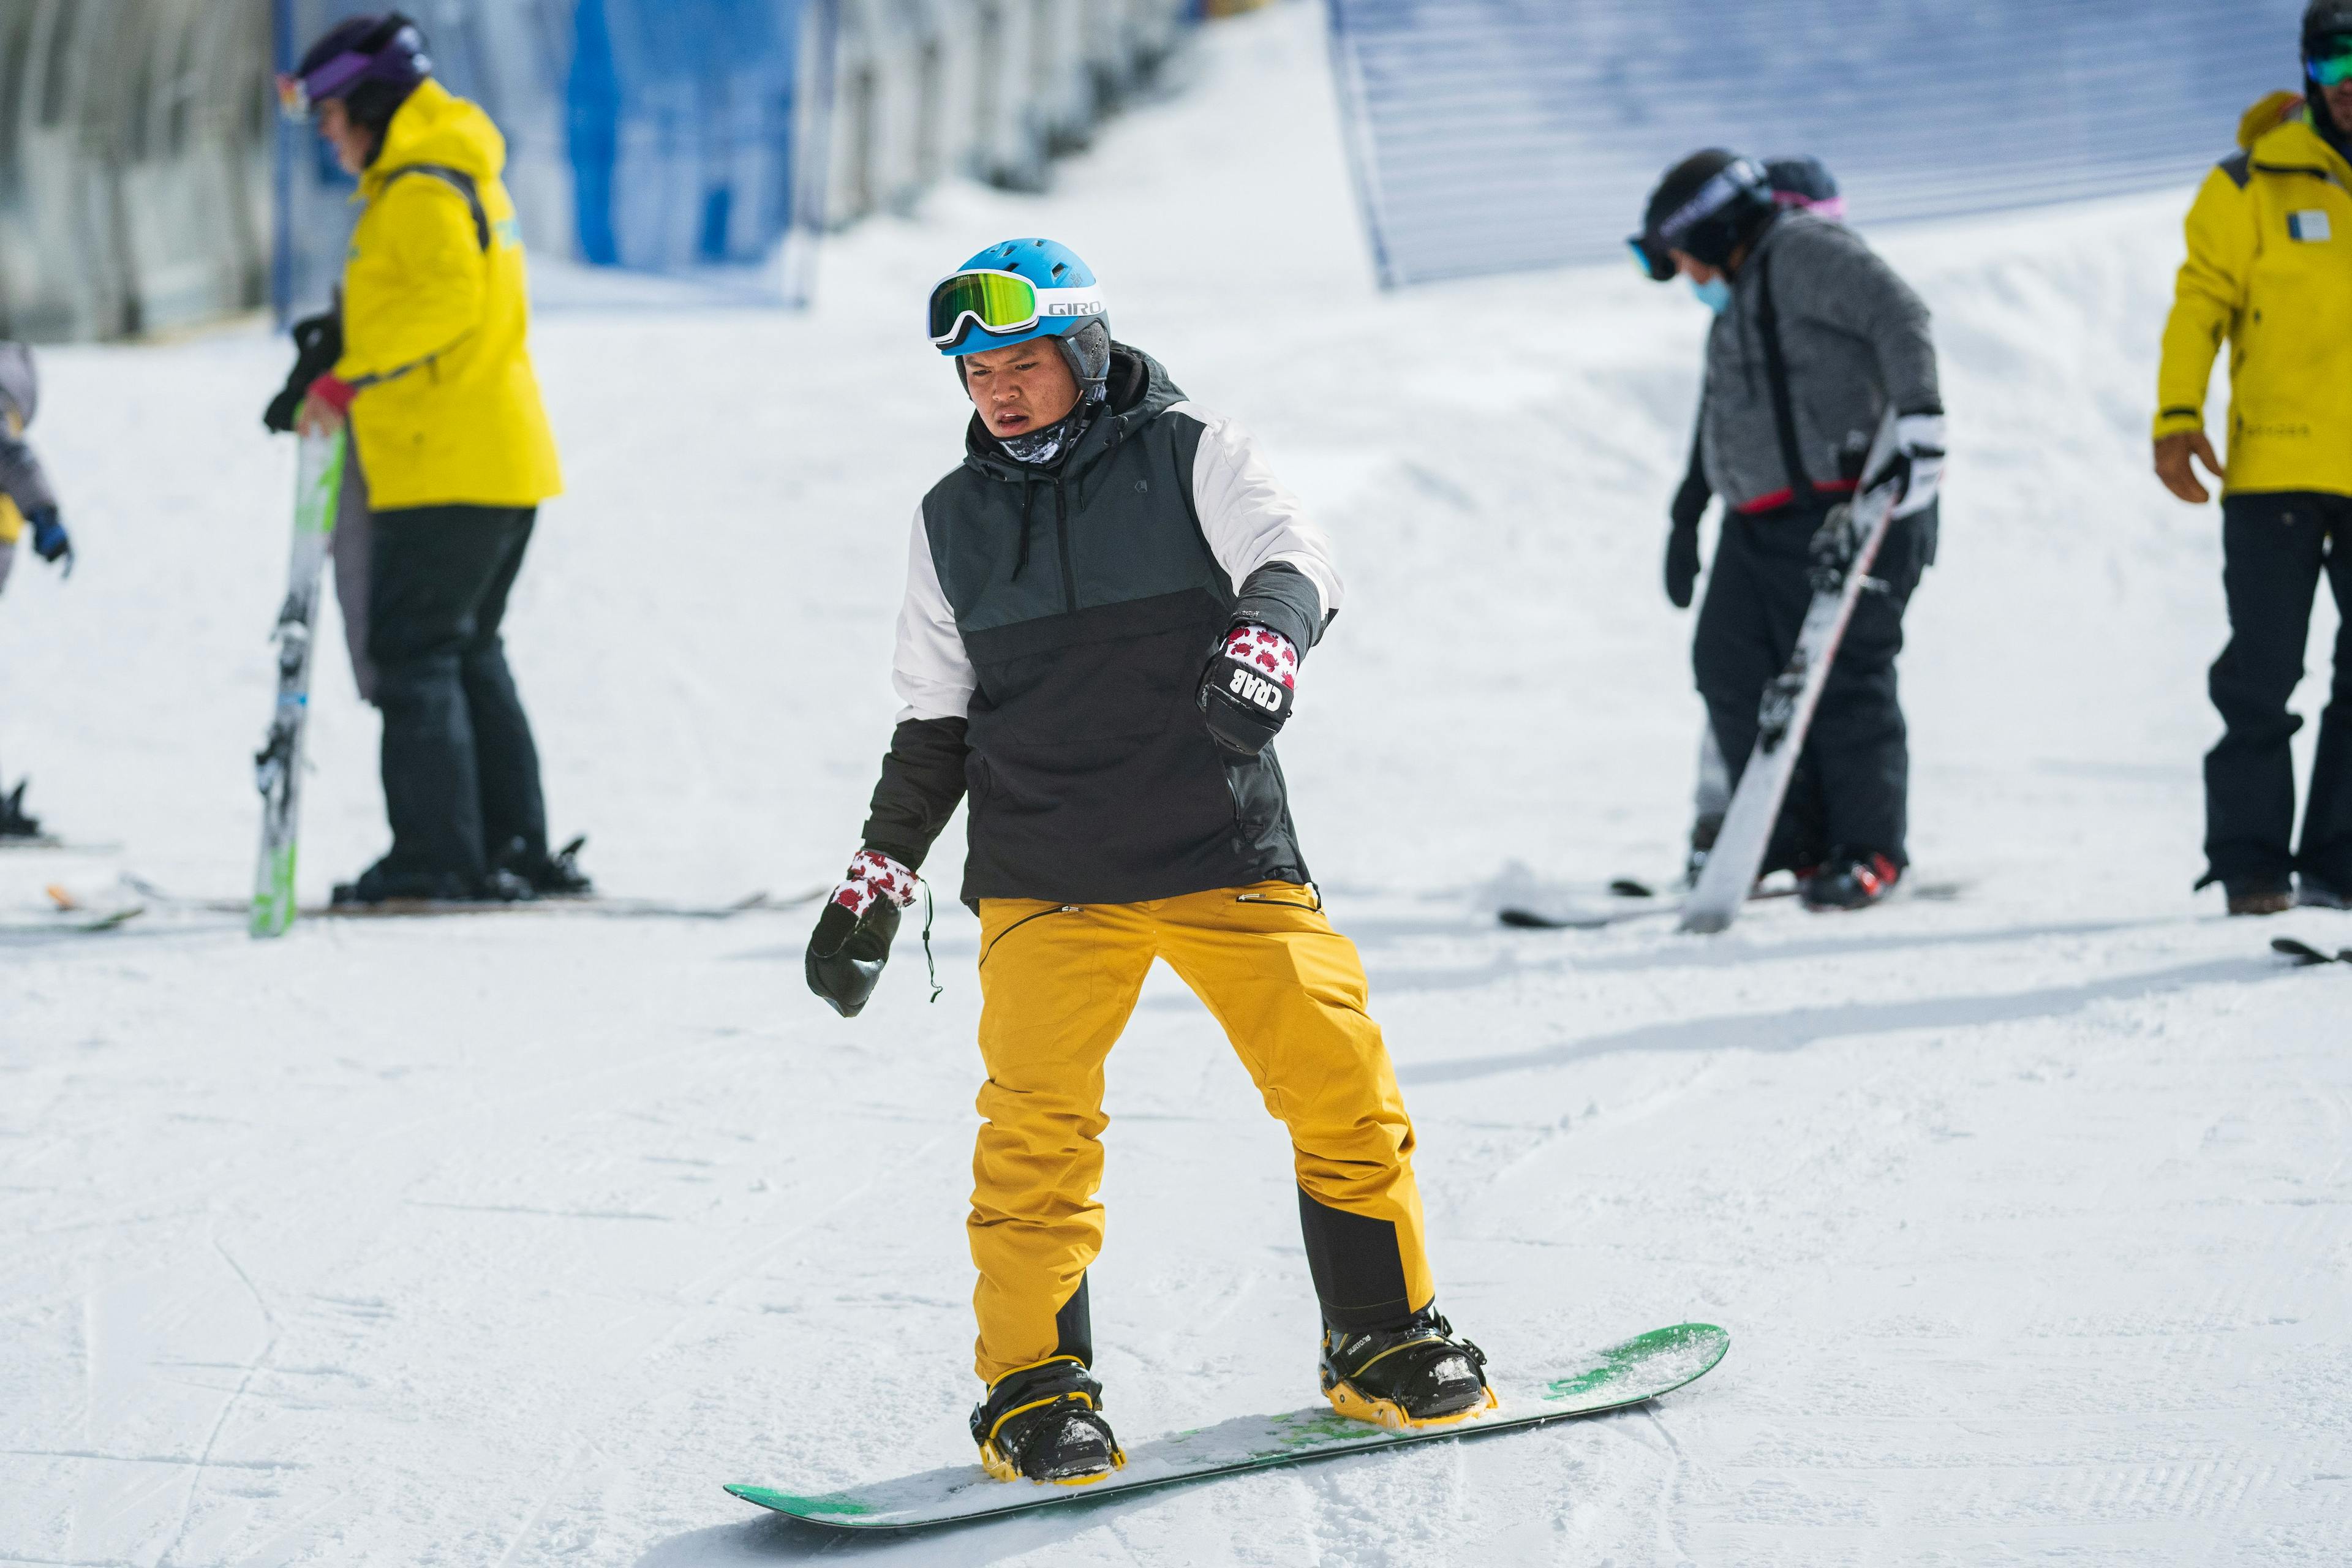 Snowboarder in a snow sports lesson at Taos Ski Valley